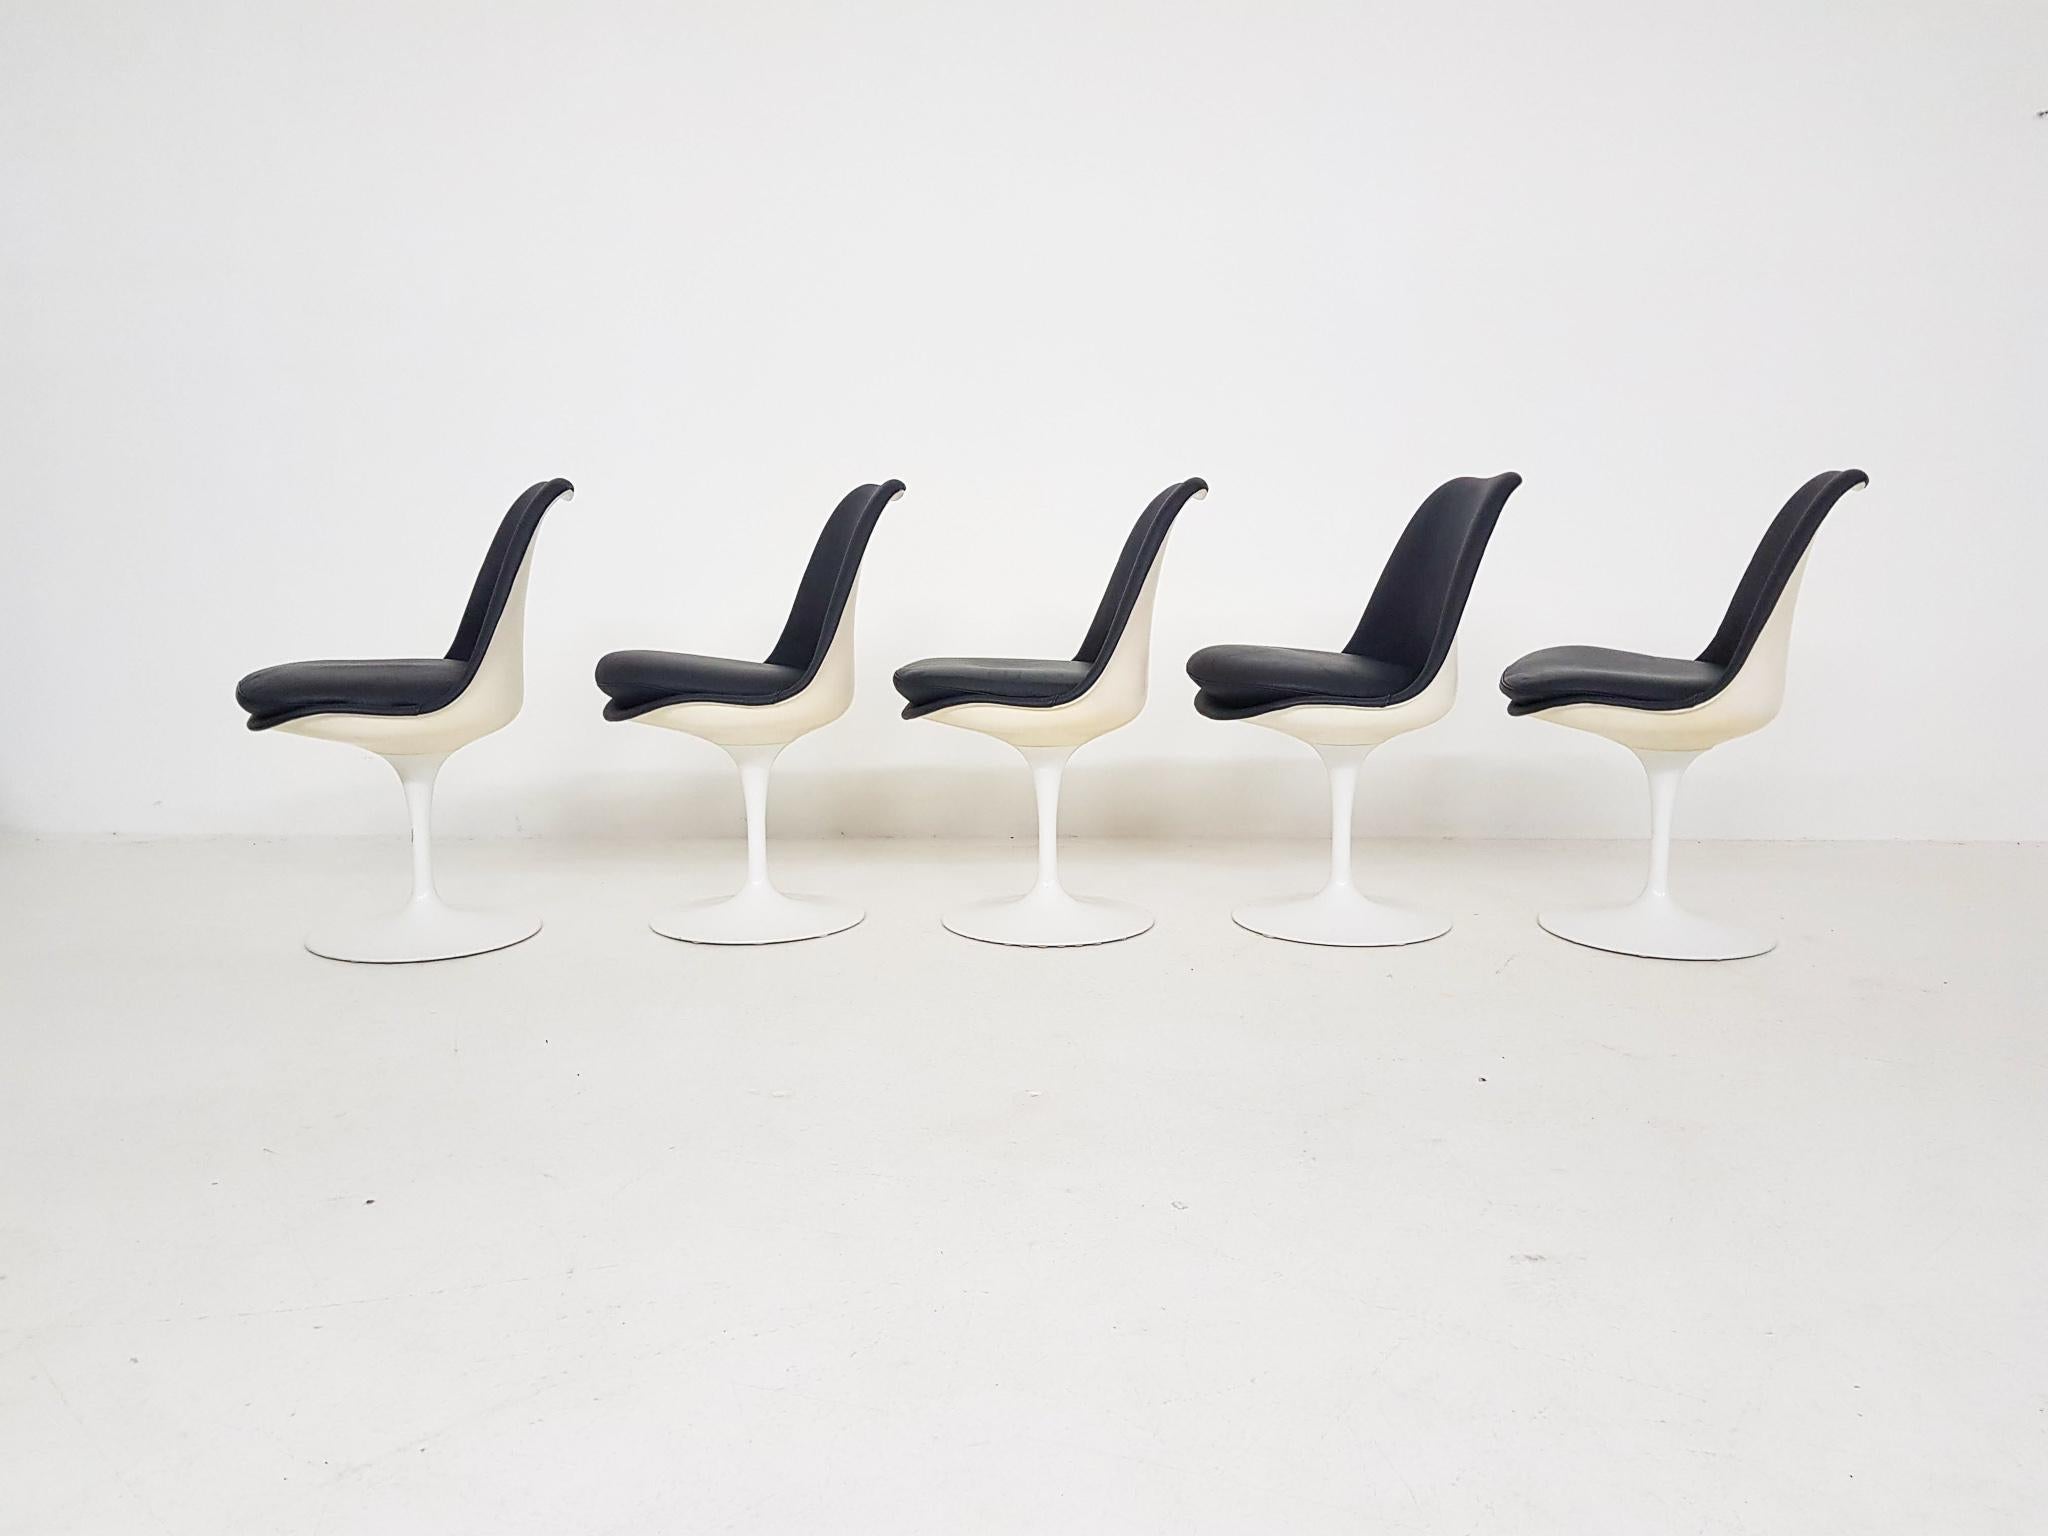 Five original and vintage Eero Saarinen dark blue leather tulip dining chairs for Knoll International, 1969.

These are authentic dining chairs from Eero Saarinen for Knoll International. These chairs were once used in the city hall wedding room of